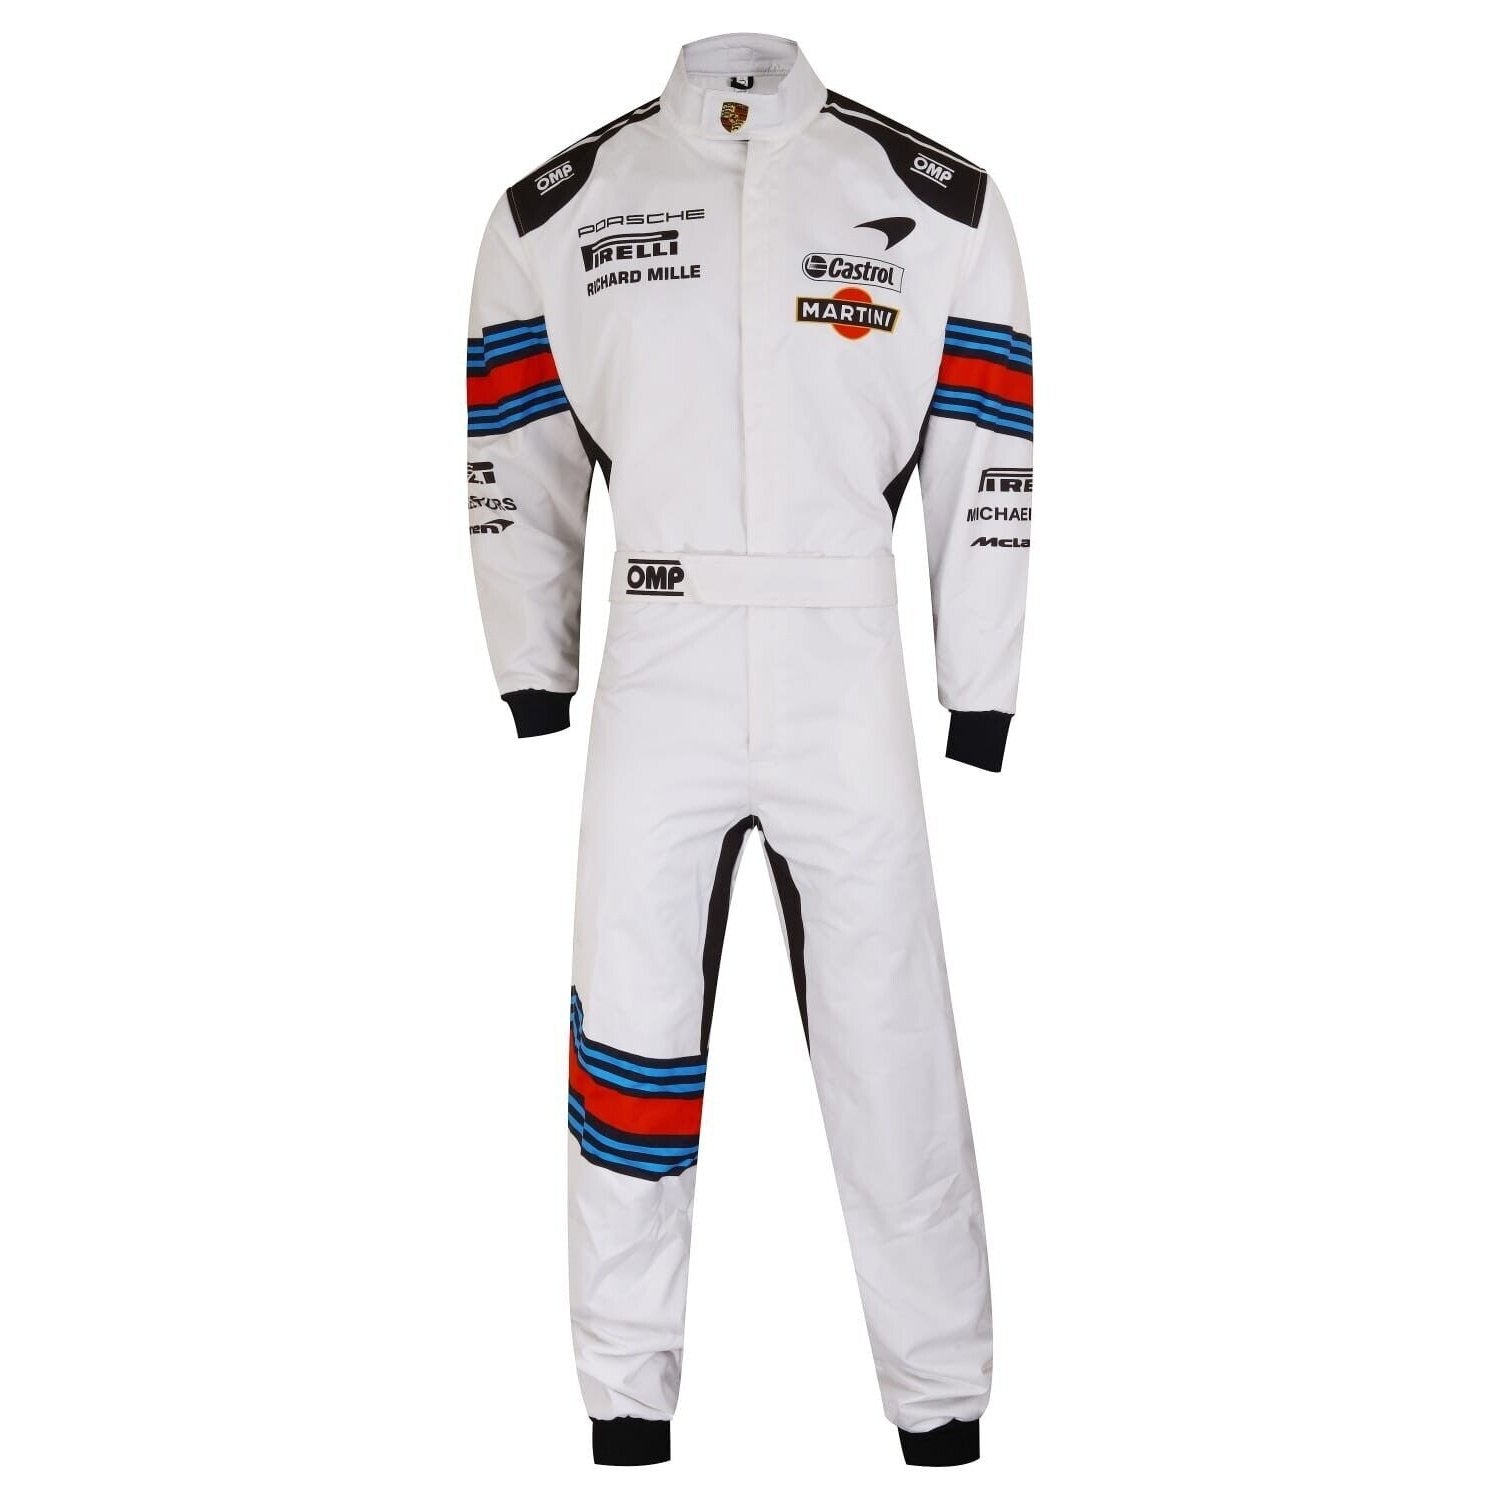 kart racing Sublimation Protective clothing Racing gear Suit N-0224